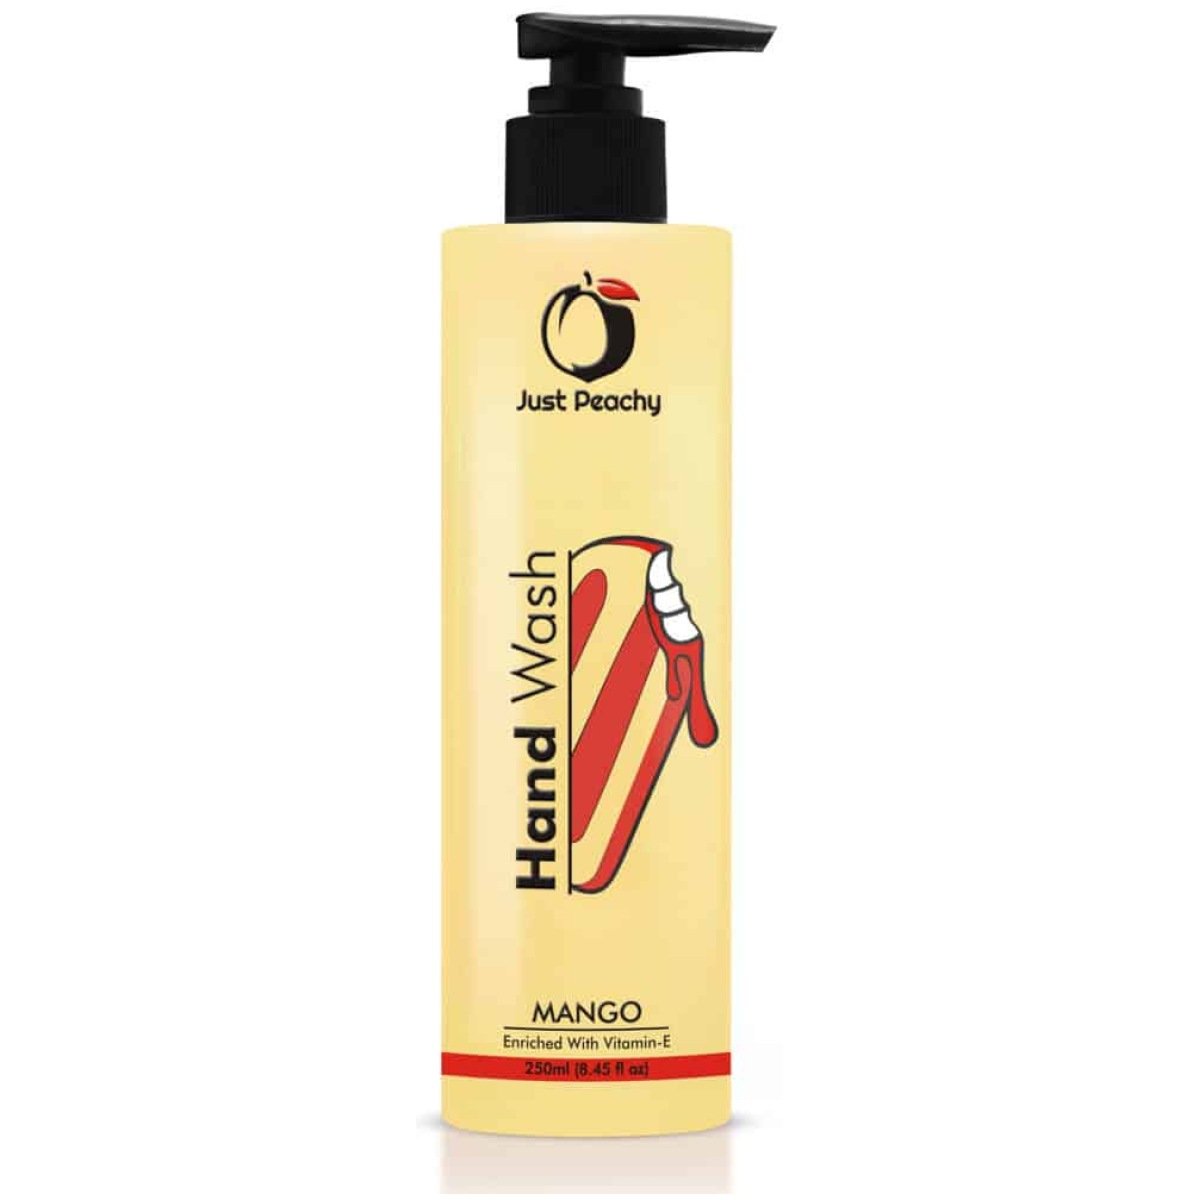 Just Peachy Moisturizing Mango Hand Wash Enriched With Vitamin E 250ml